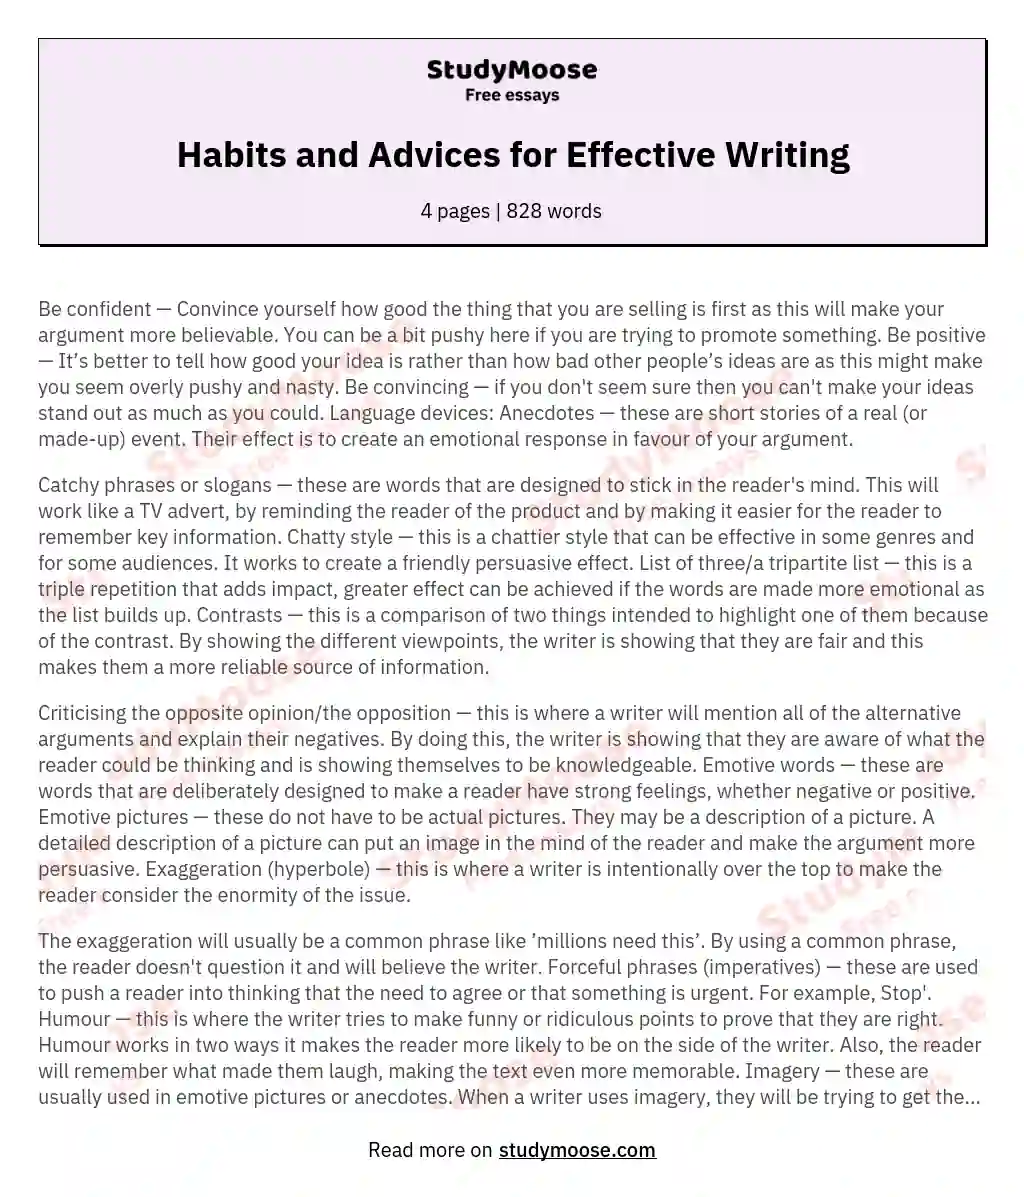 Habits and Advices for Effective Writing essay